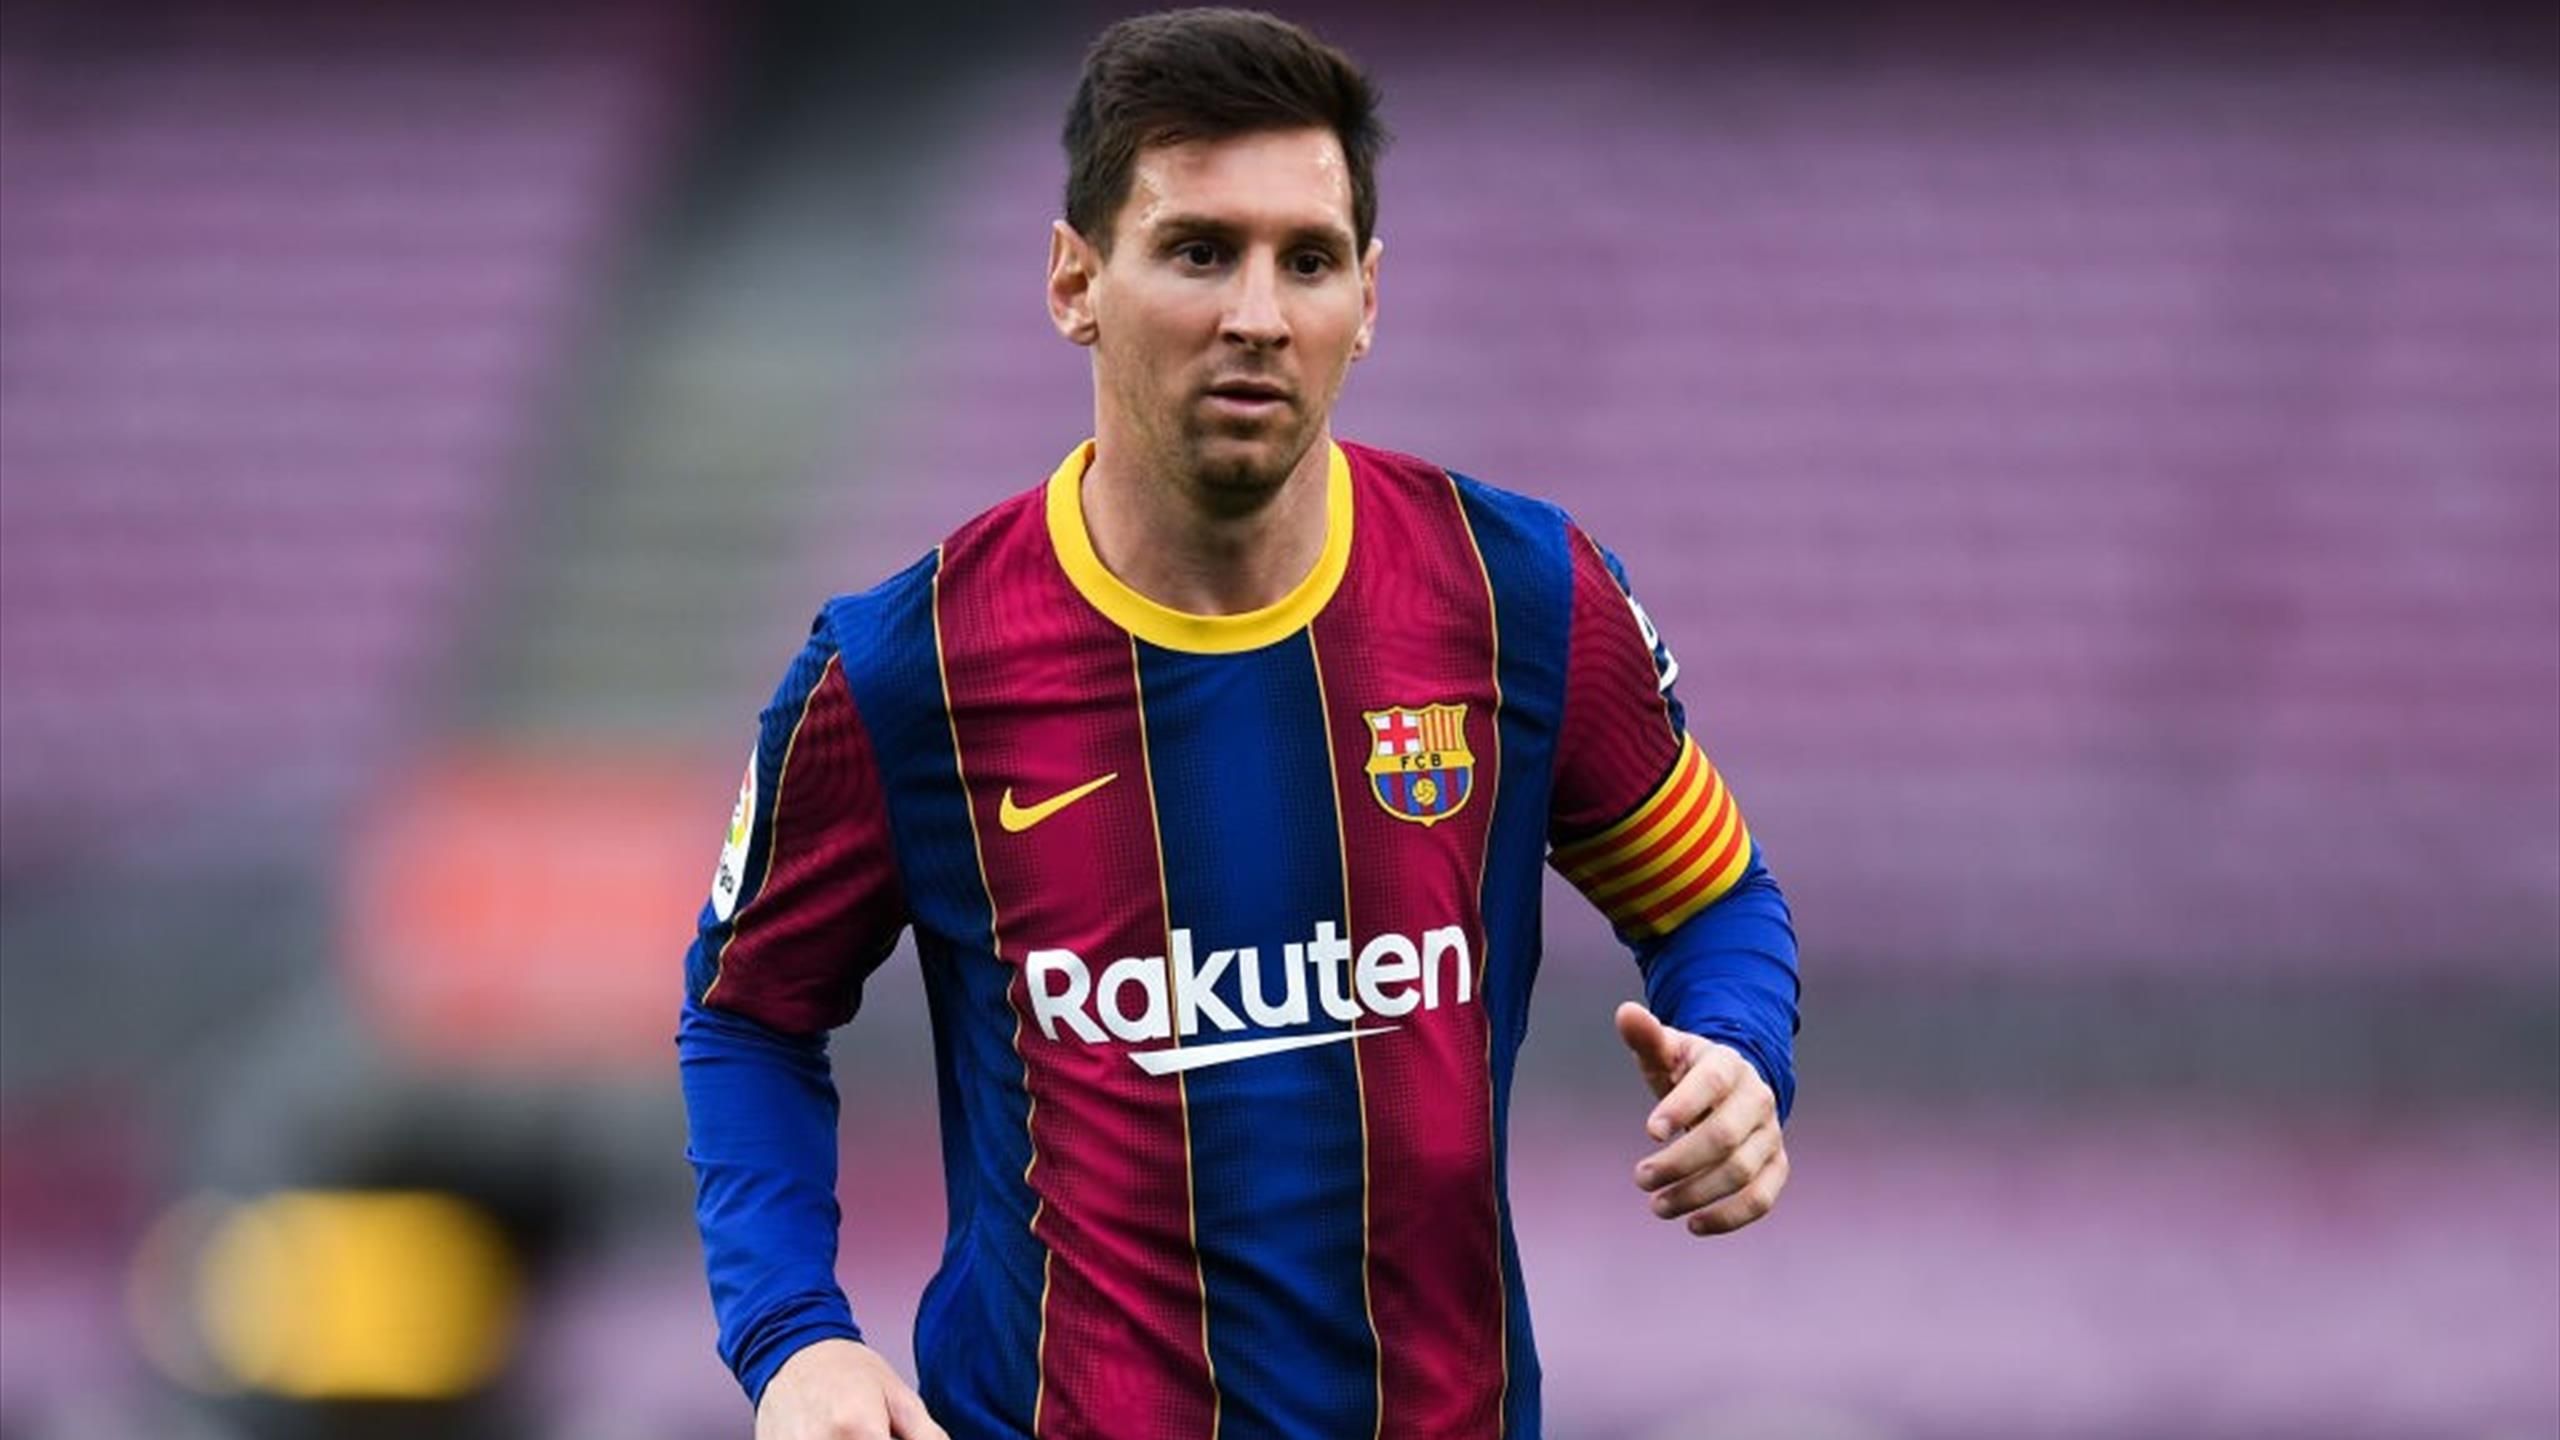 Transfer news - Barcelona confirm Lionel Messi won't sign new contract,  will join new club as free agent - Eurosport